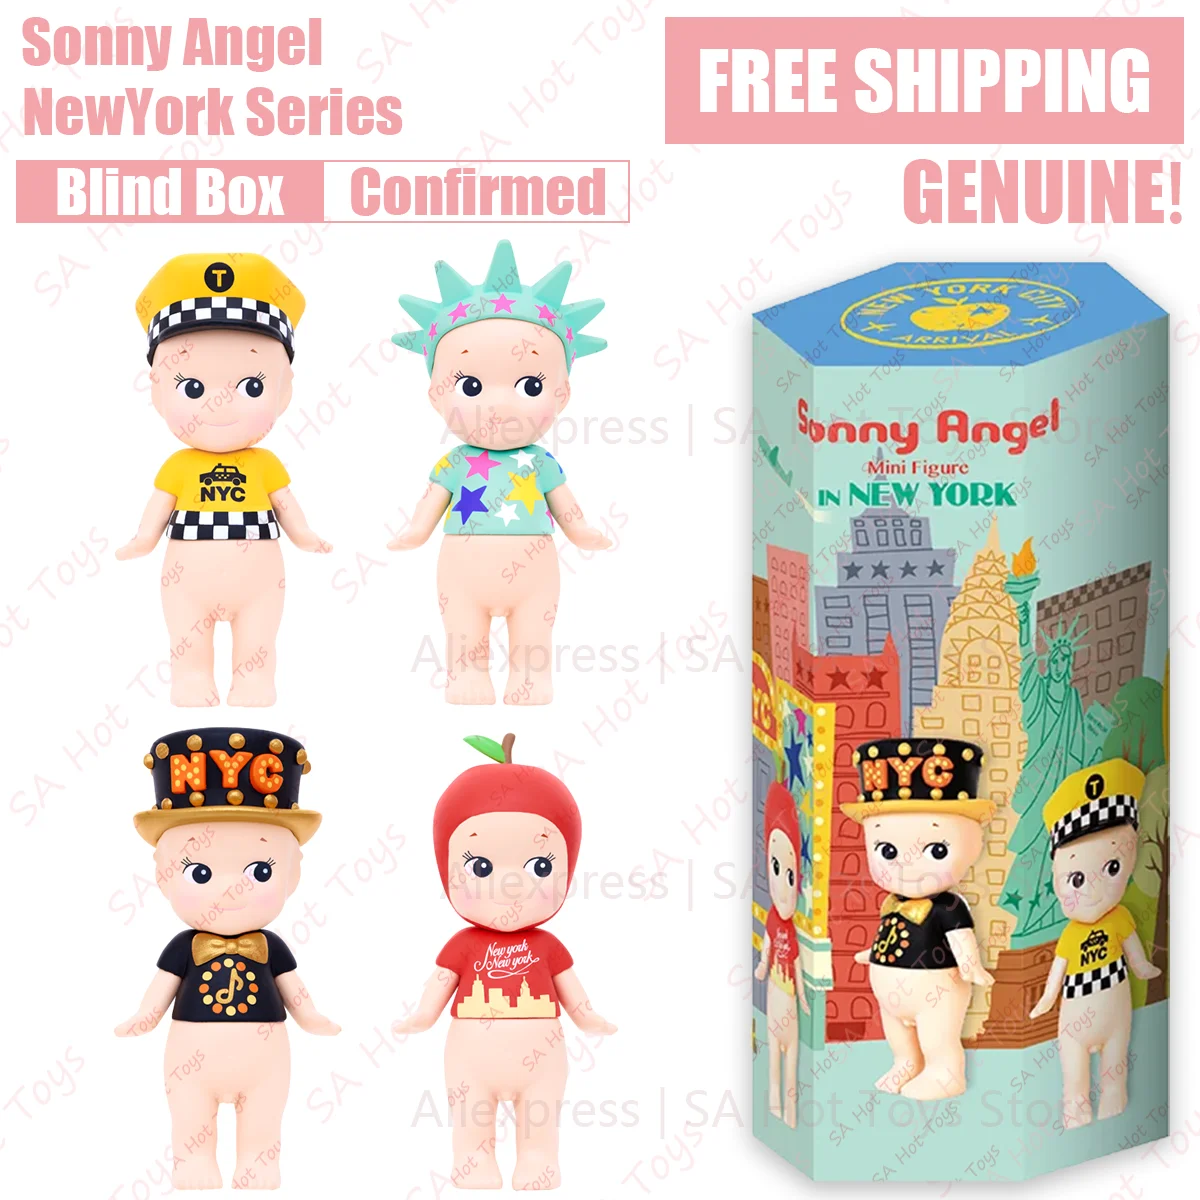 

Sonny Angel New York Series Blind Box Confirmed style Genuine telephone Screen Decoration Birthday Gift Mysterious Surpris